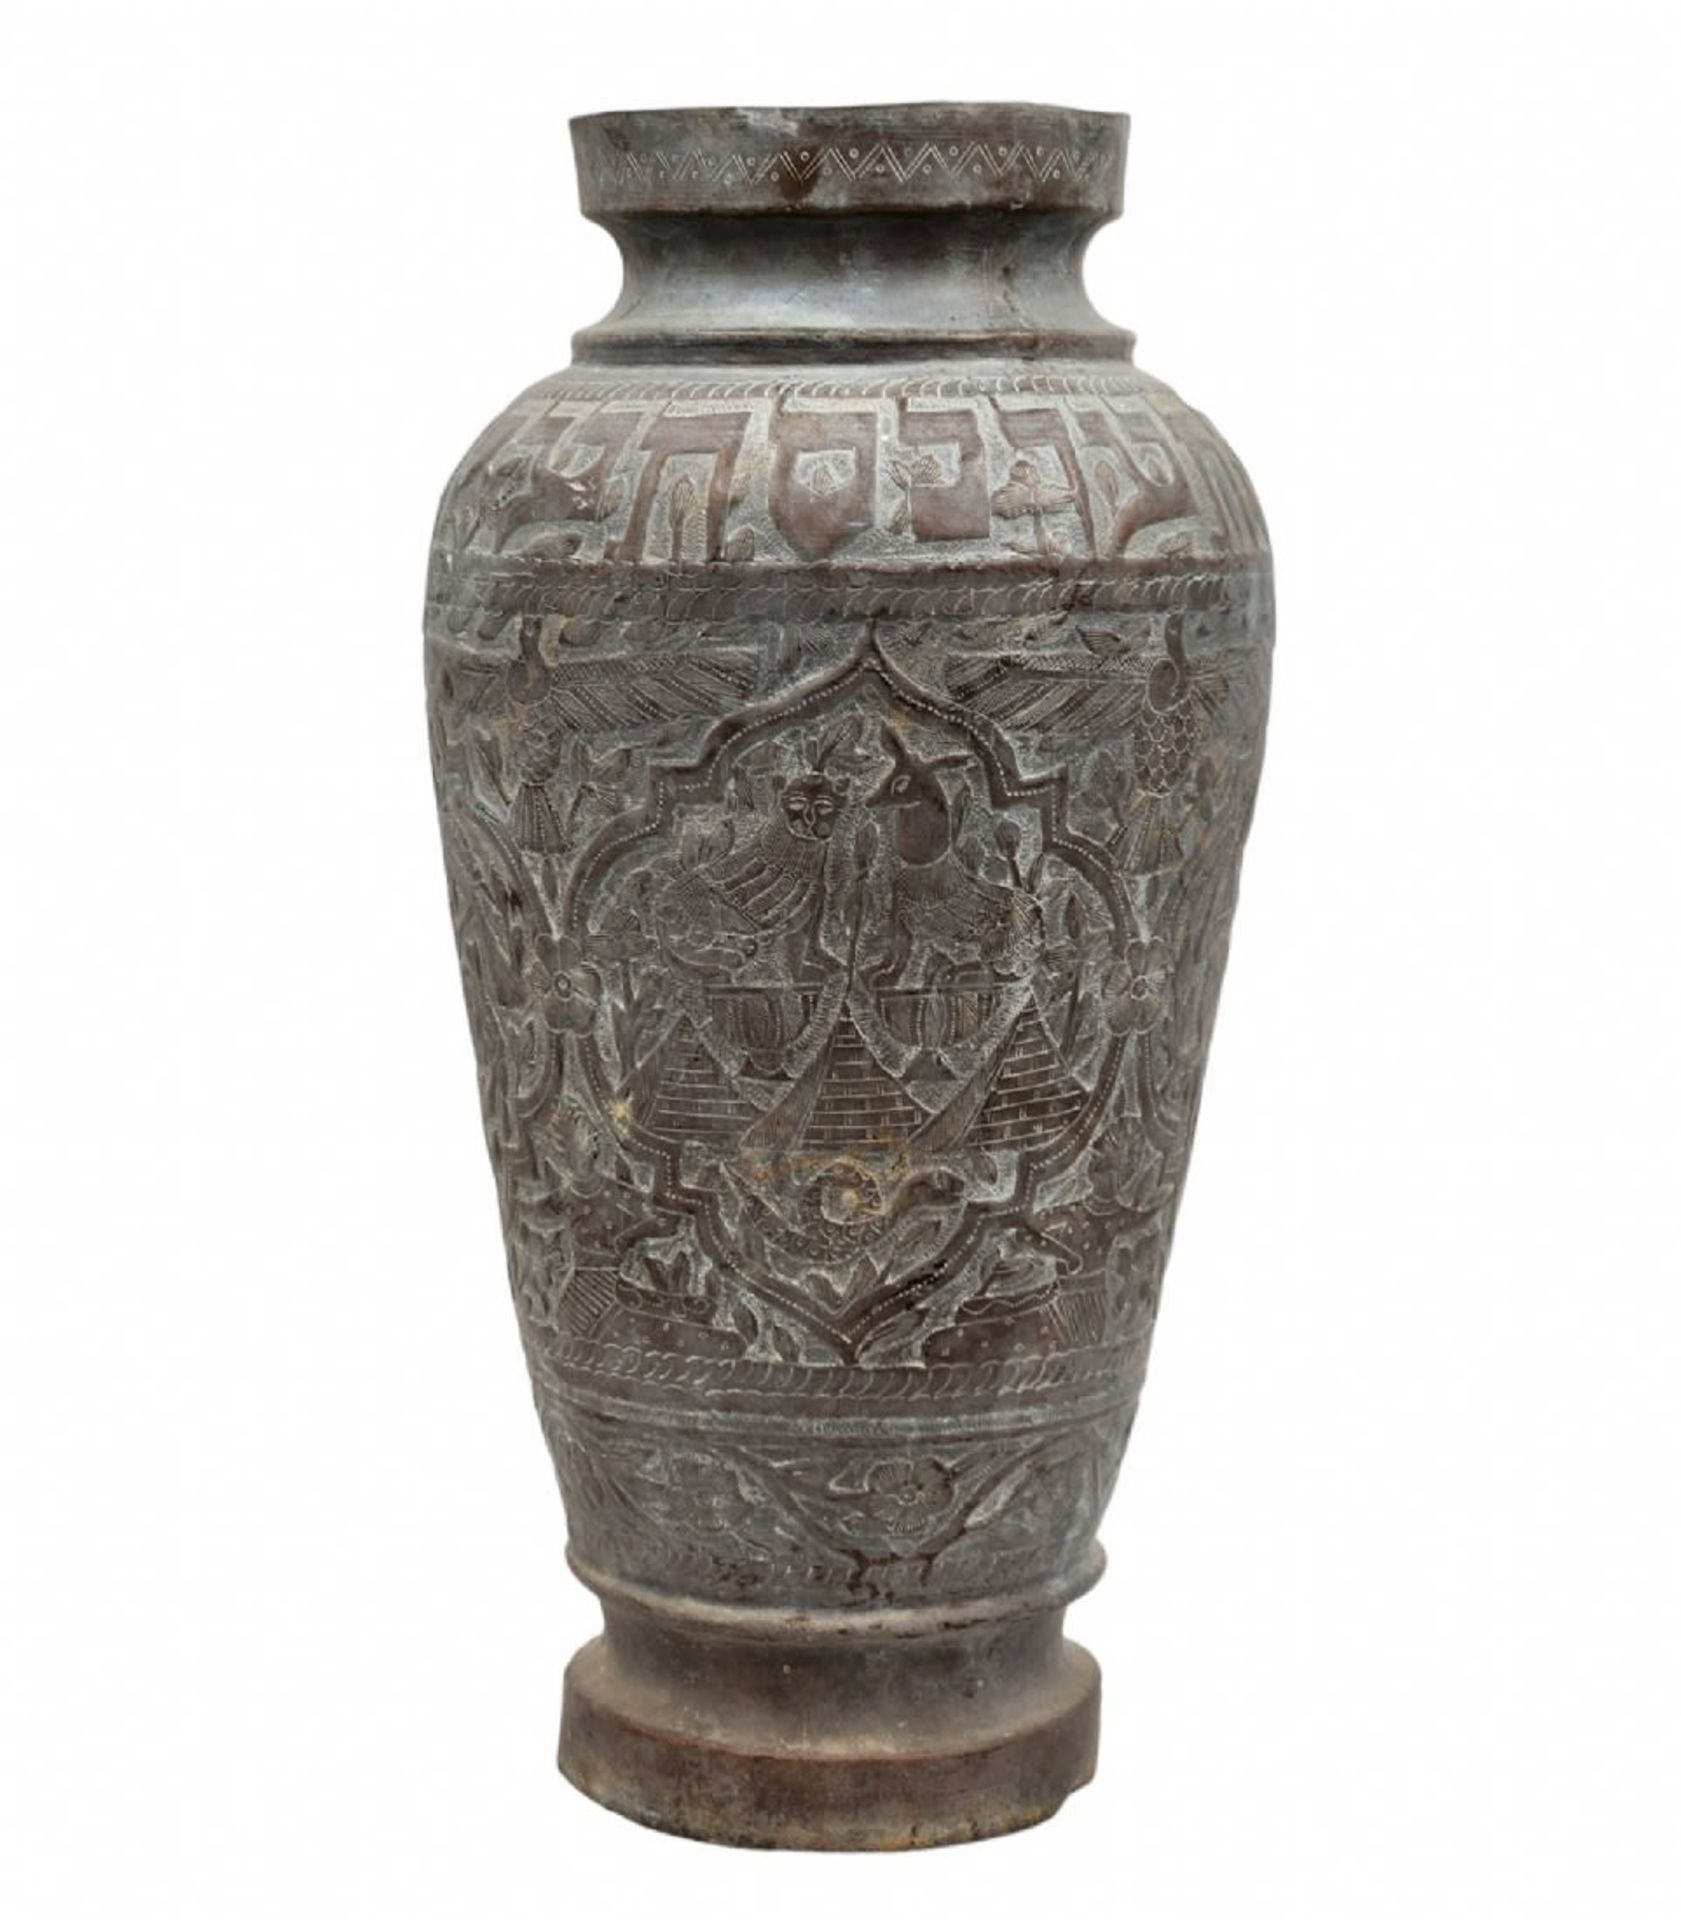 A beautiful antique Persian urn made of hammered copper, with figures and Hebrew inscription, the